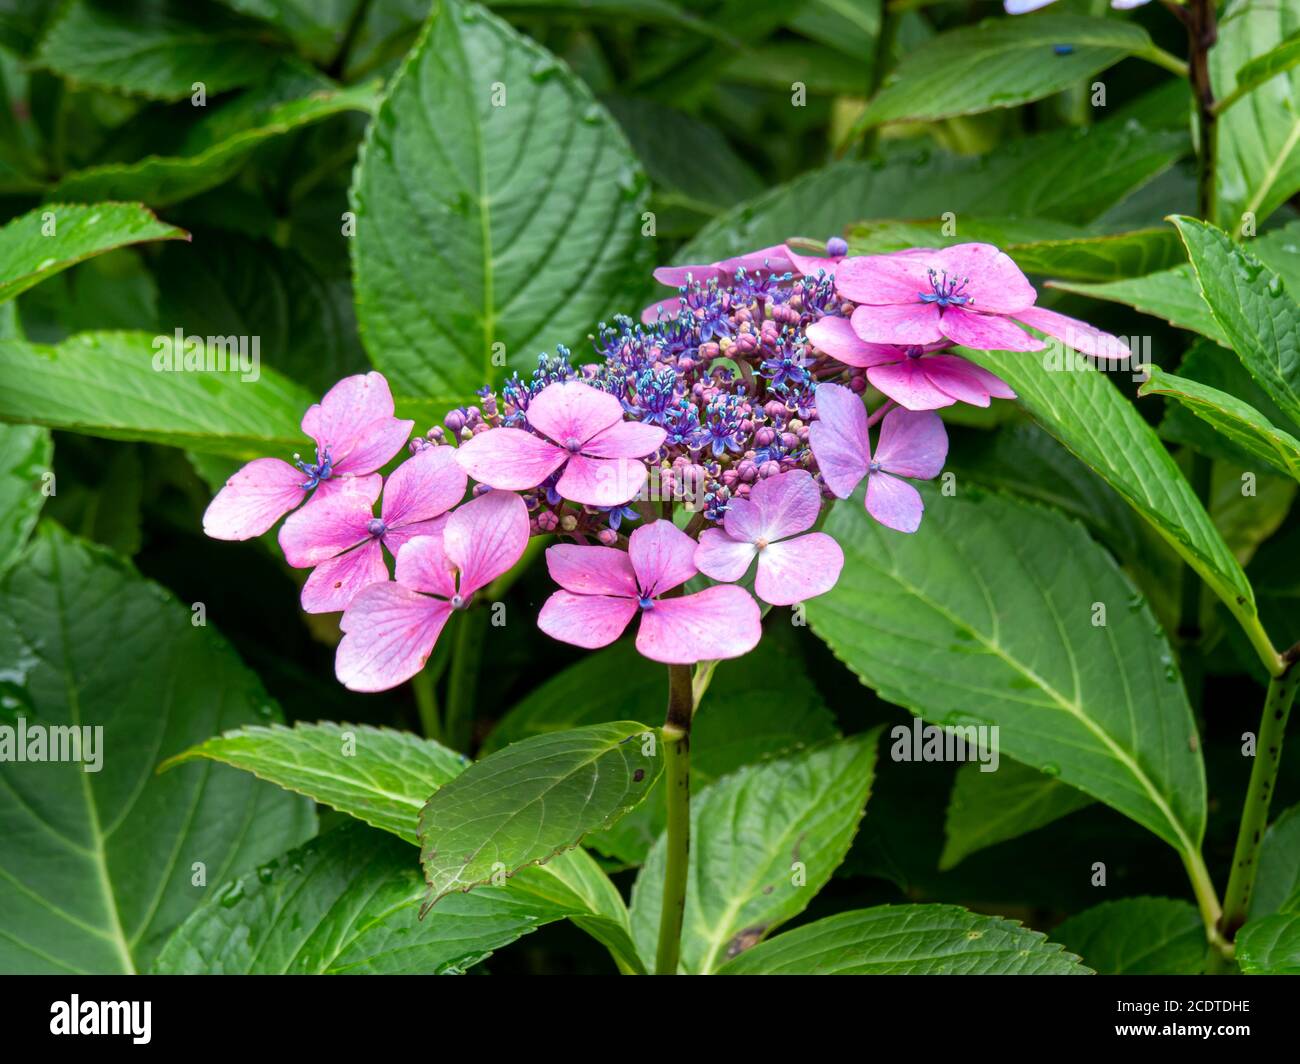 Pretty pink and blue flowers and green leaves on a Hydrangea bush Stock Photo